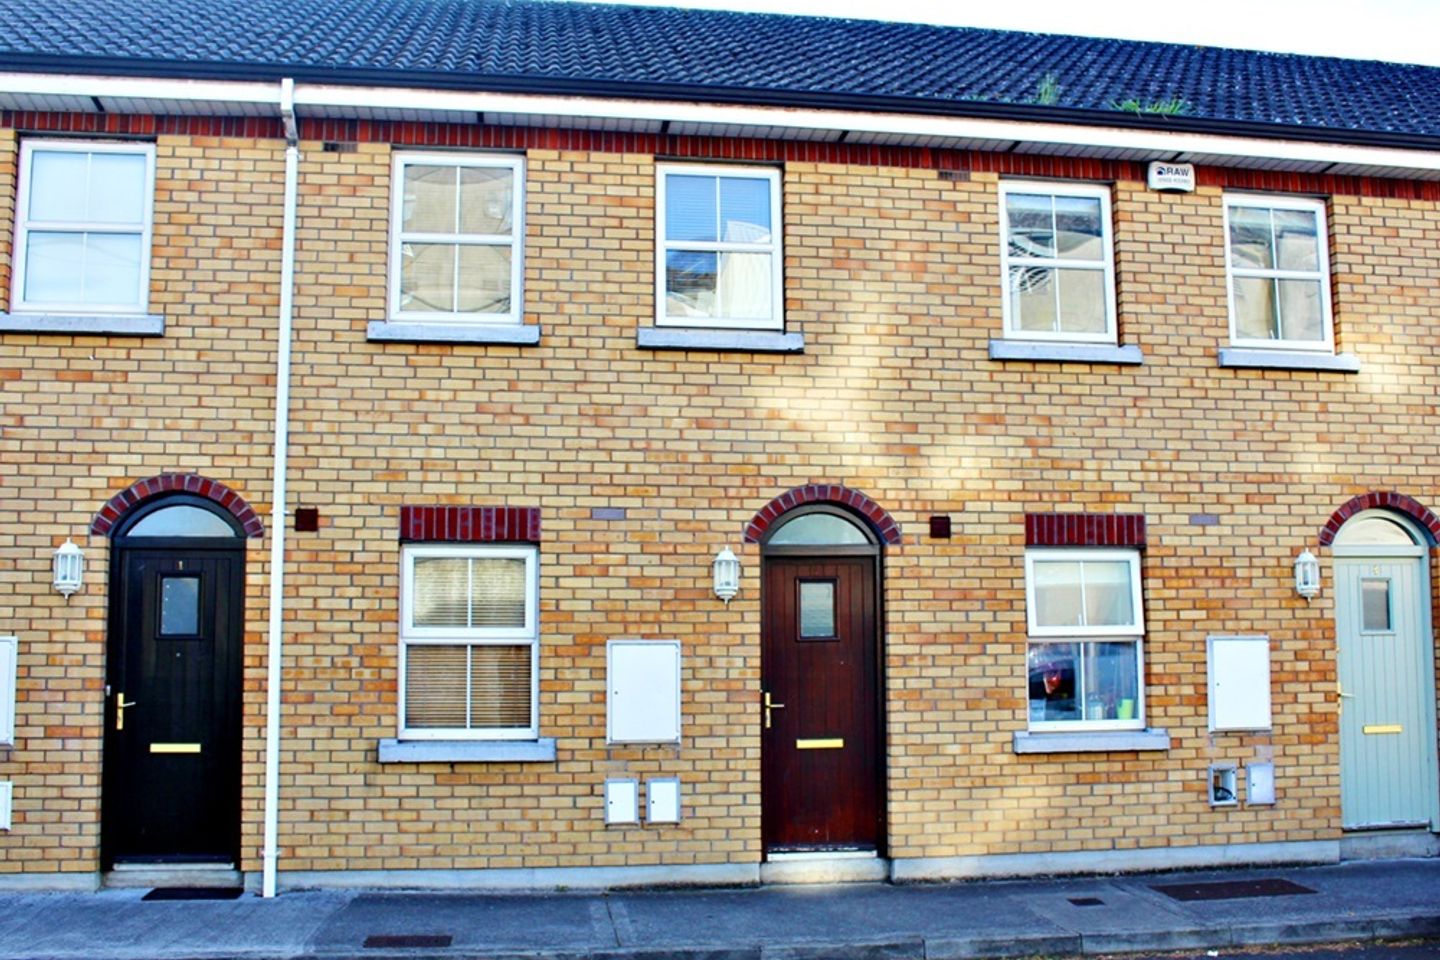 2 Offaly Street, Tullamore, Co. Offaly